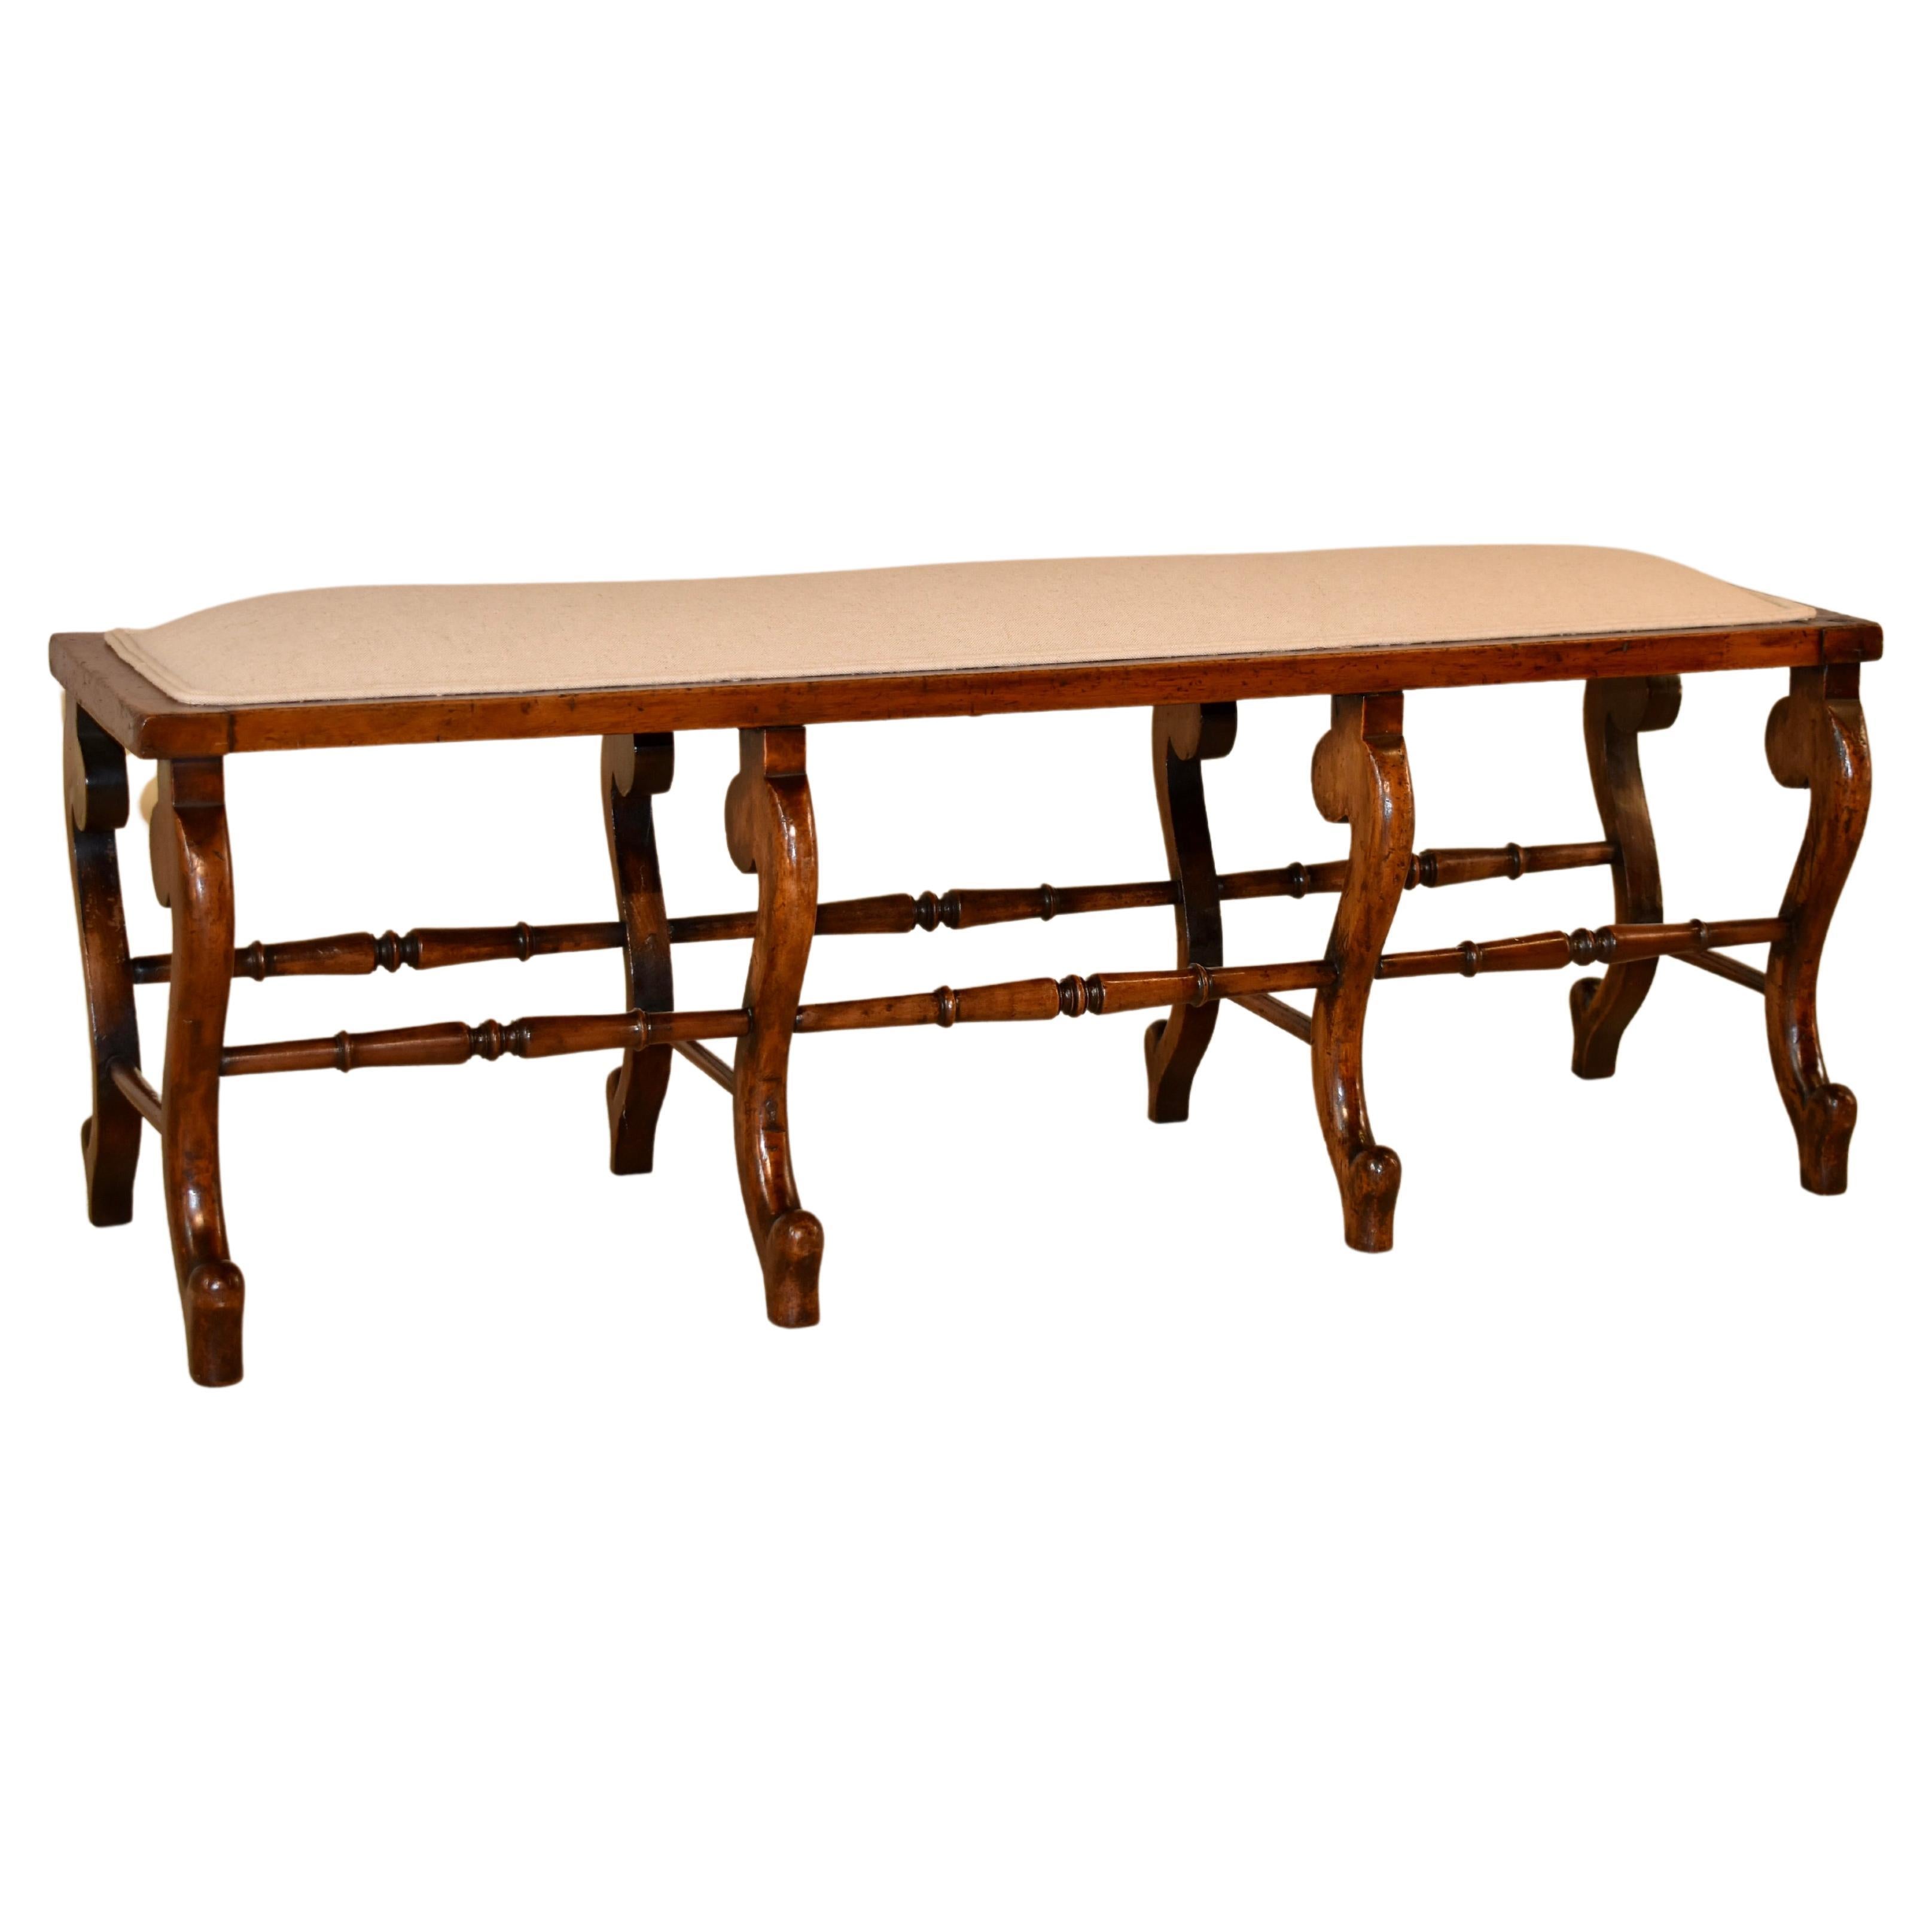 19th Century French Upholstered Bench